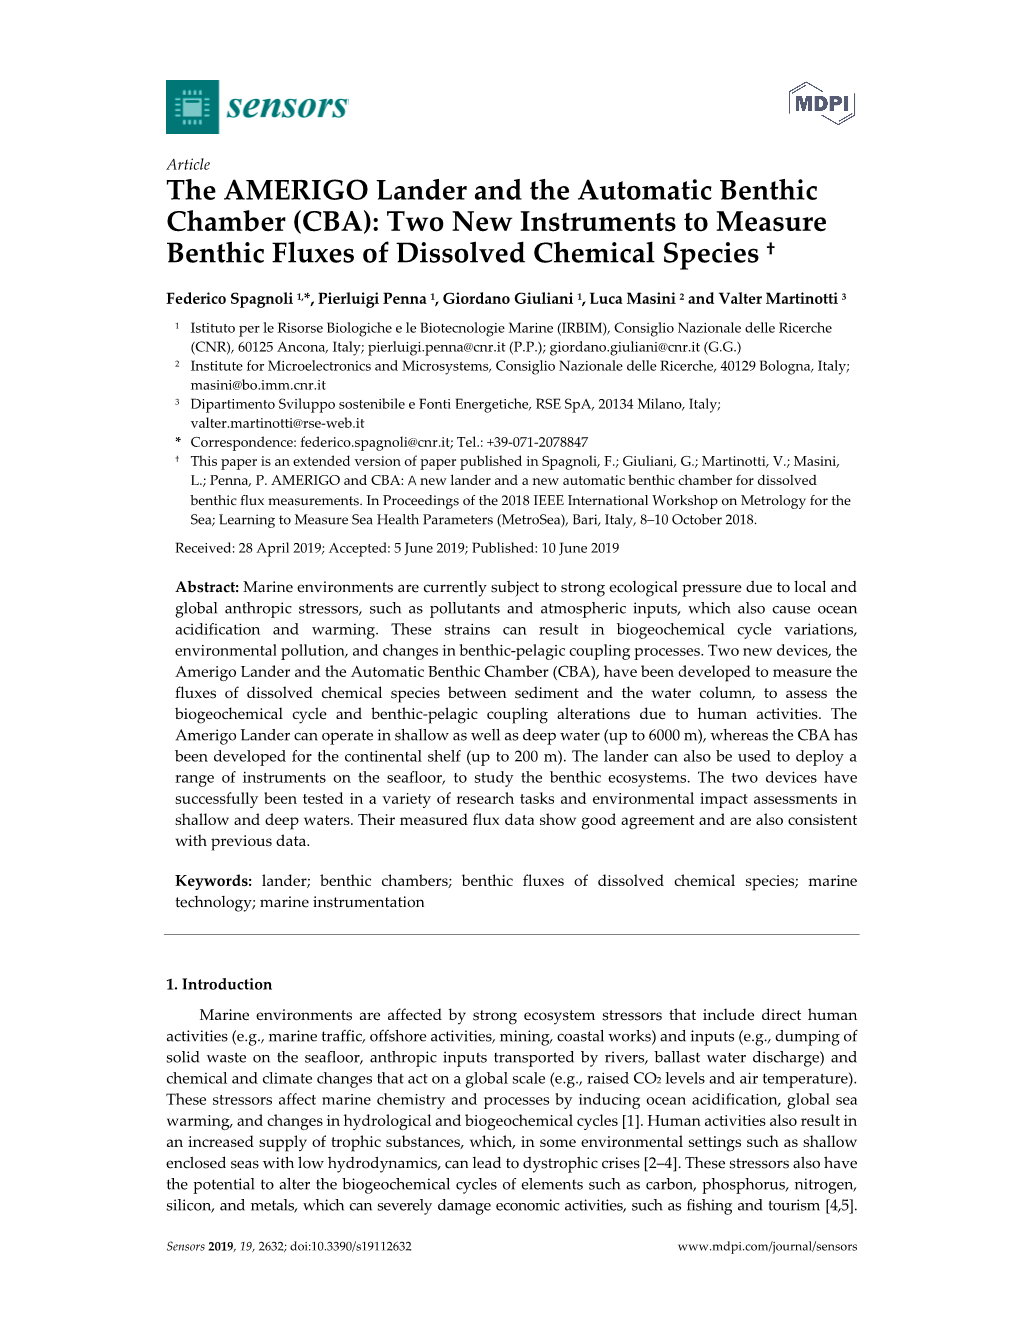 The AMERIGO Lander and the Automatic Benthic Chamber (CBA): Two New Instruments to Measure Benthic Fluxes of Dissolved Chemical Species †